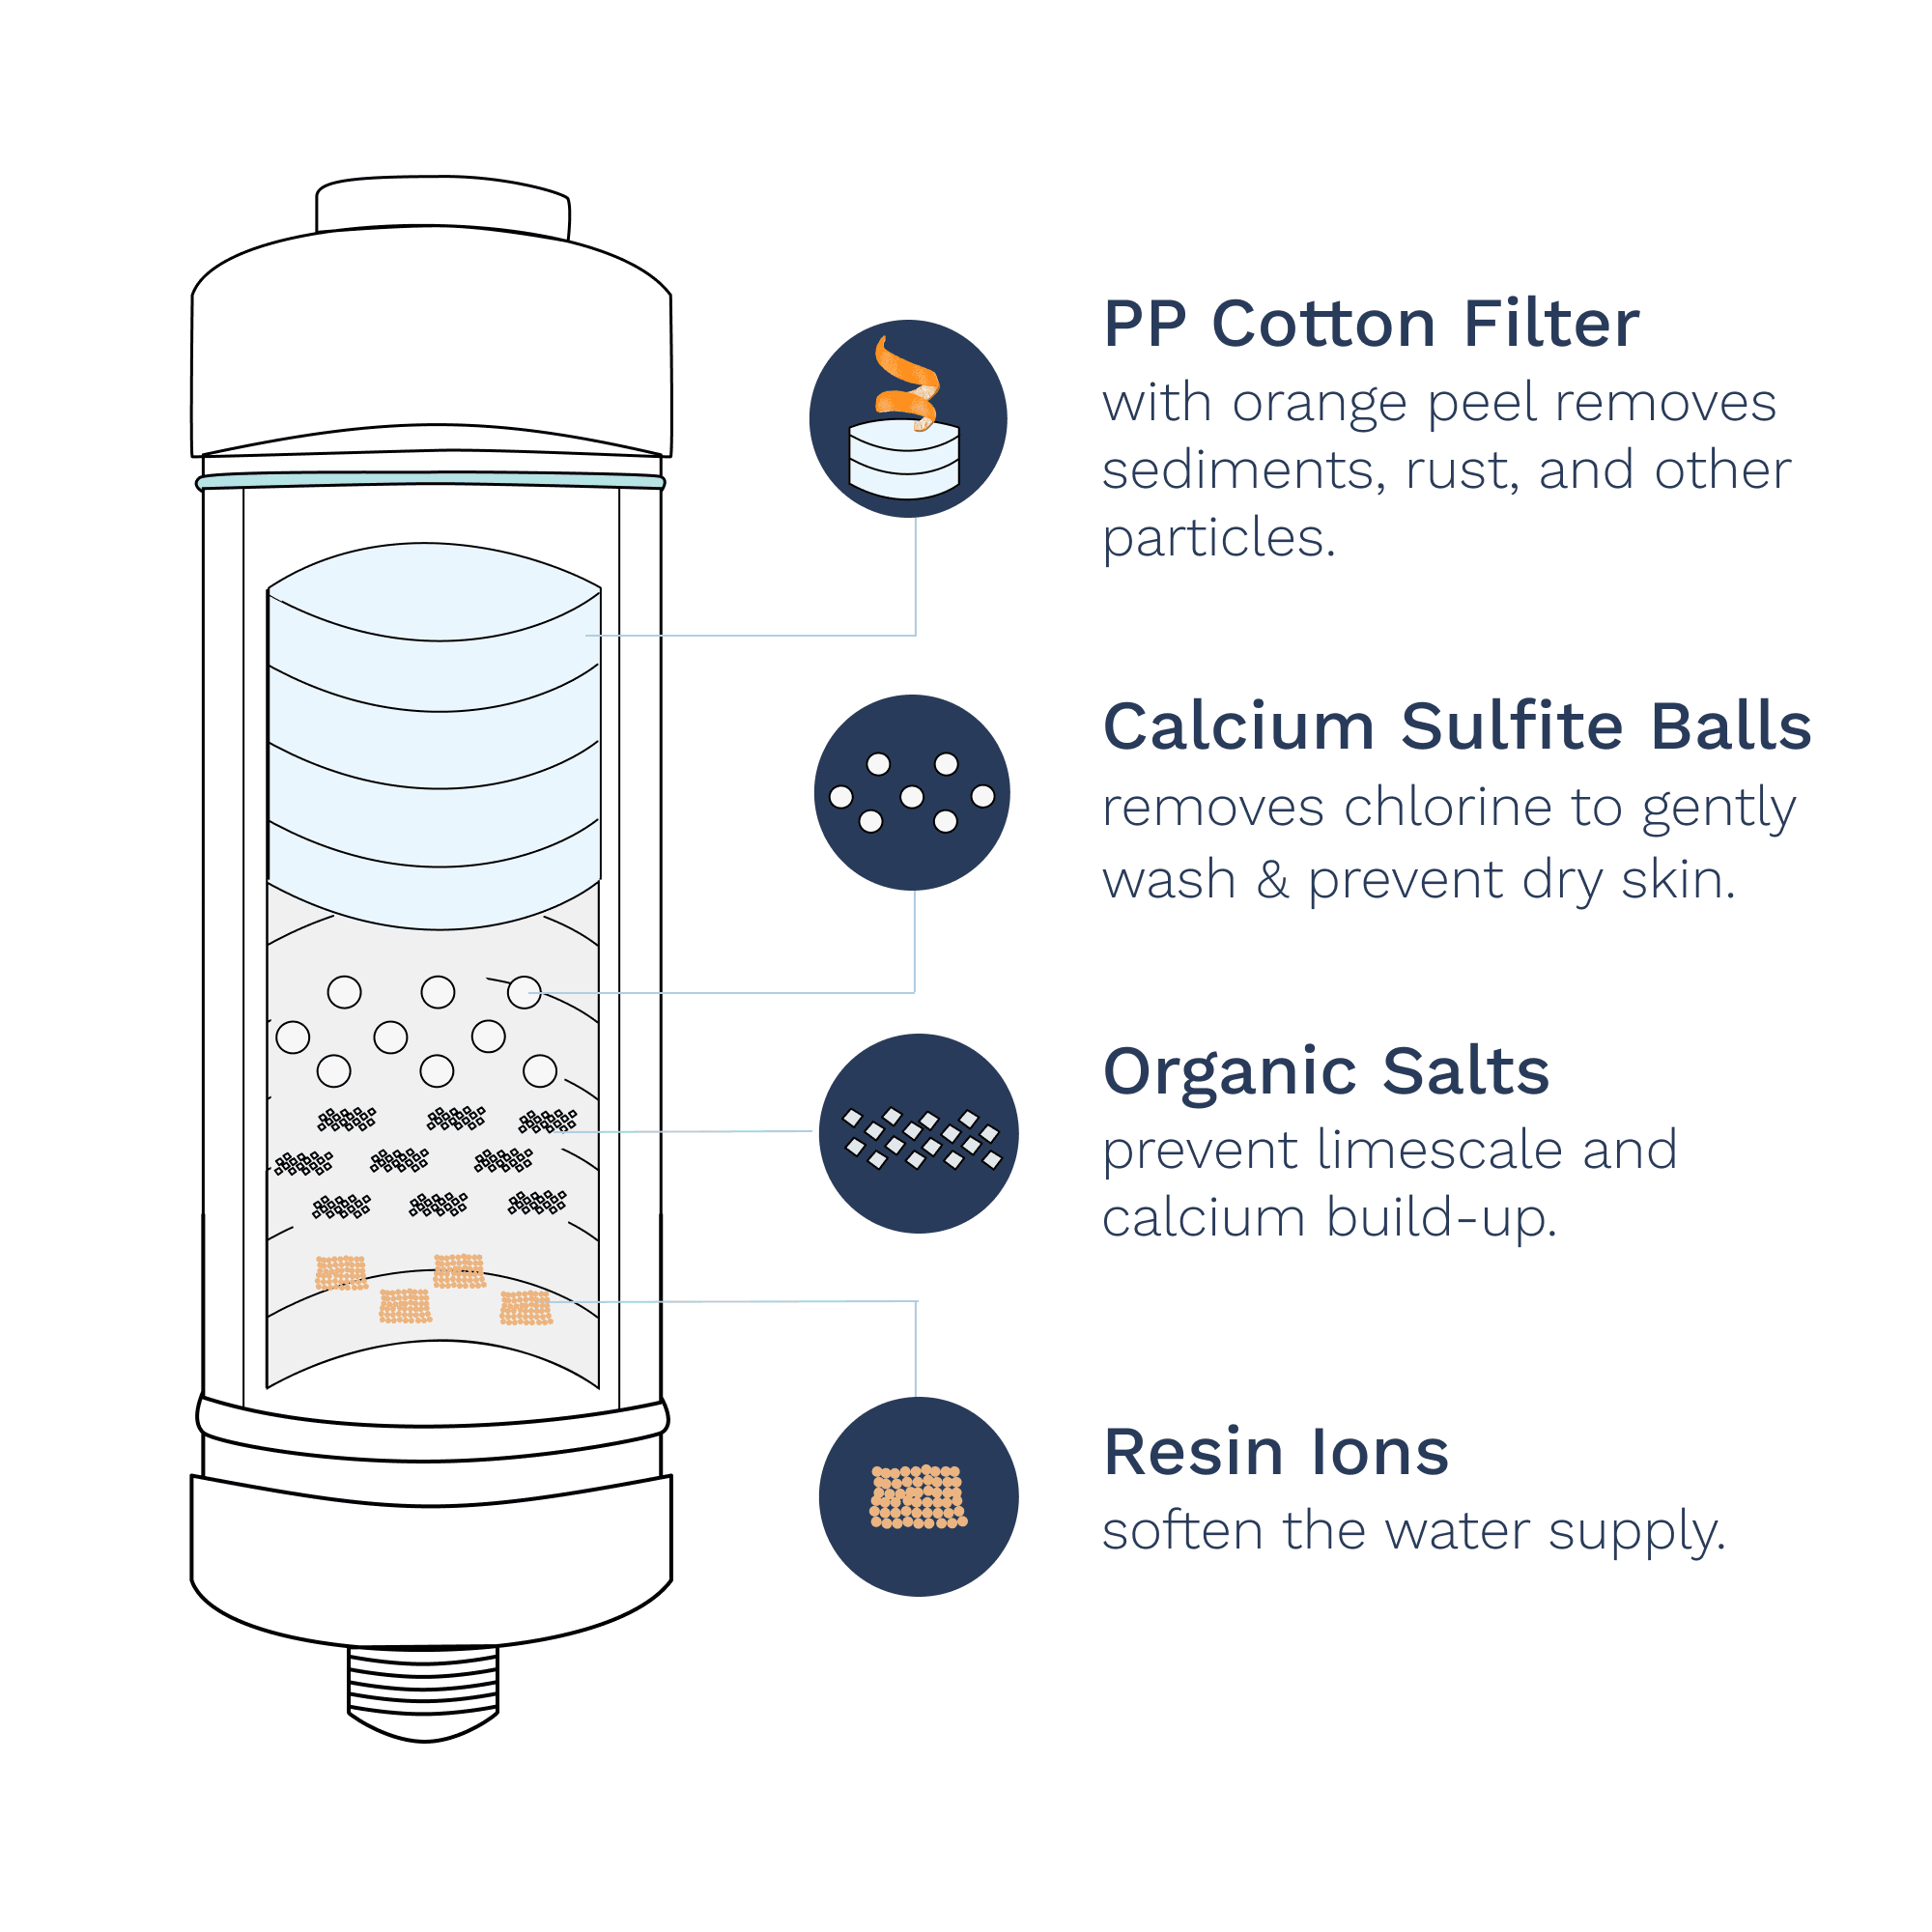 Filter features PP Cotton Filter, Calcium Sulfite Balls, Organic Salts, and Resin Ions